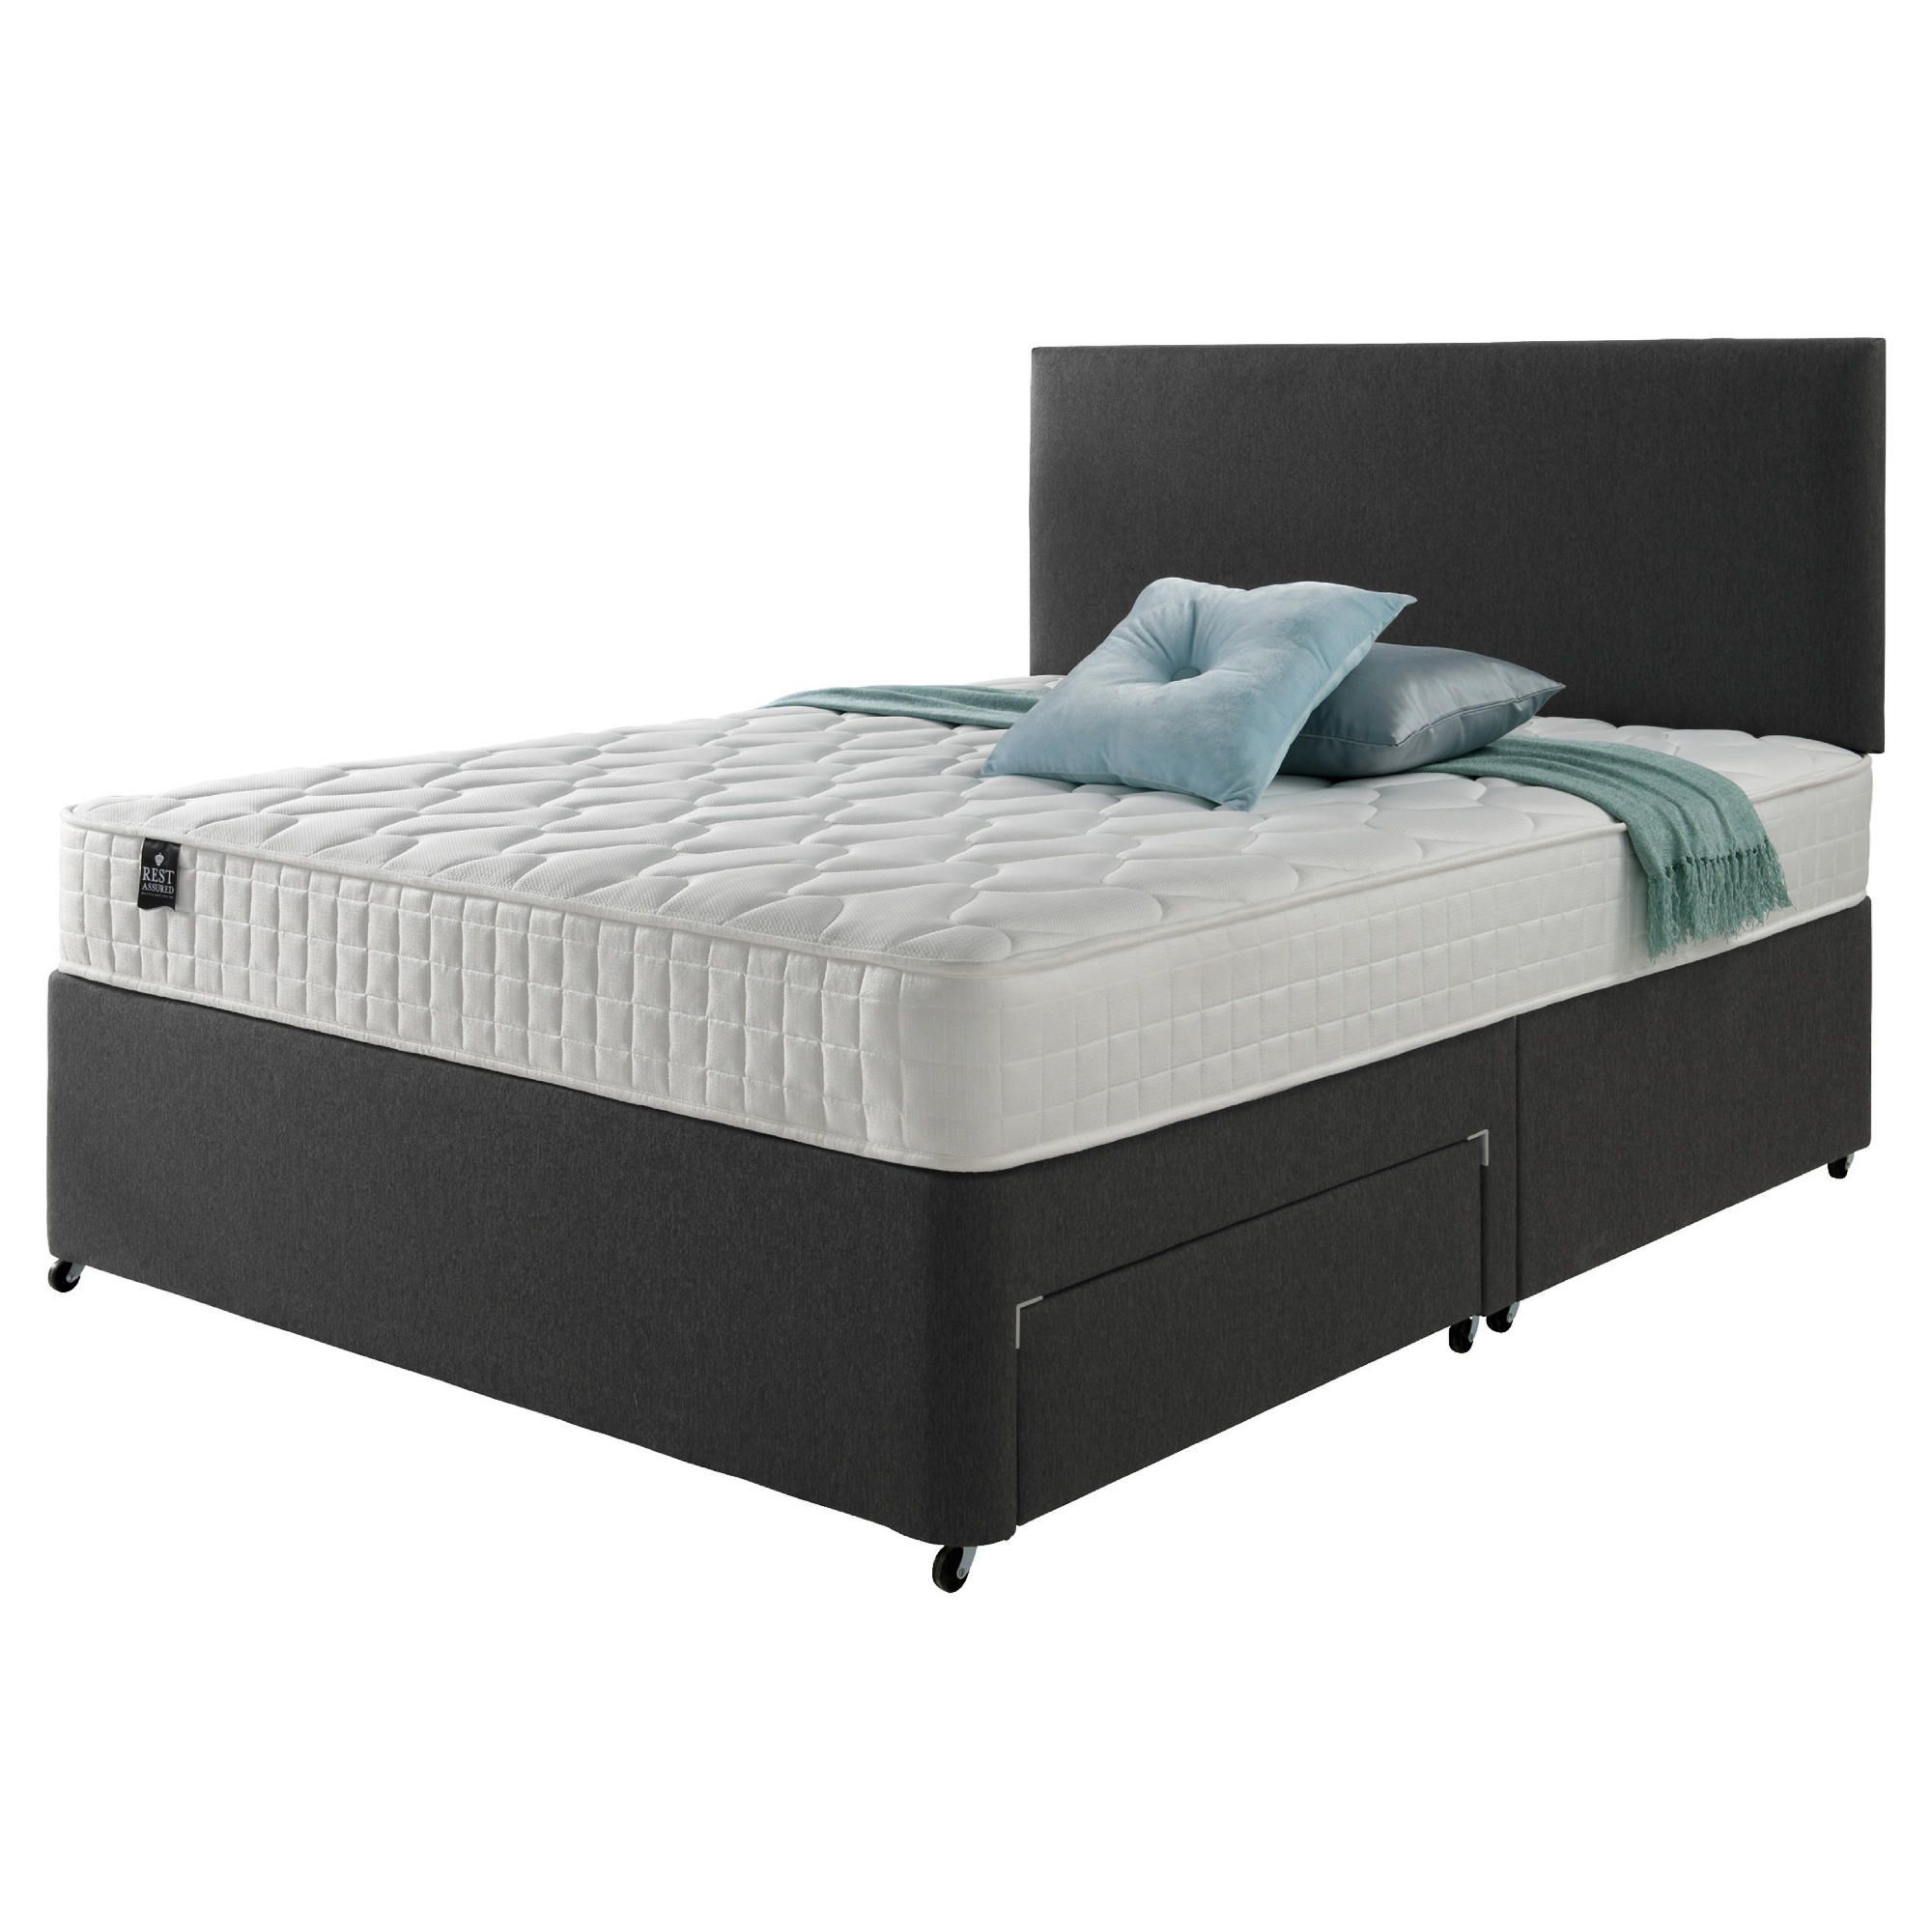 Rest Assured Classic Non Storage Super King Divan and Headboard Charcoal at Tesco Direct